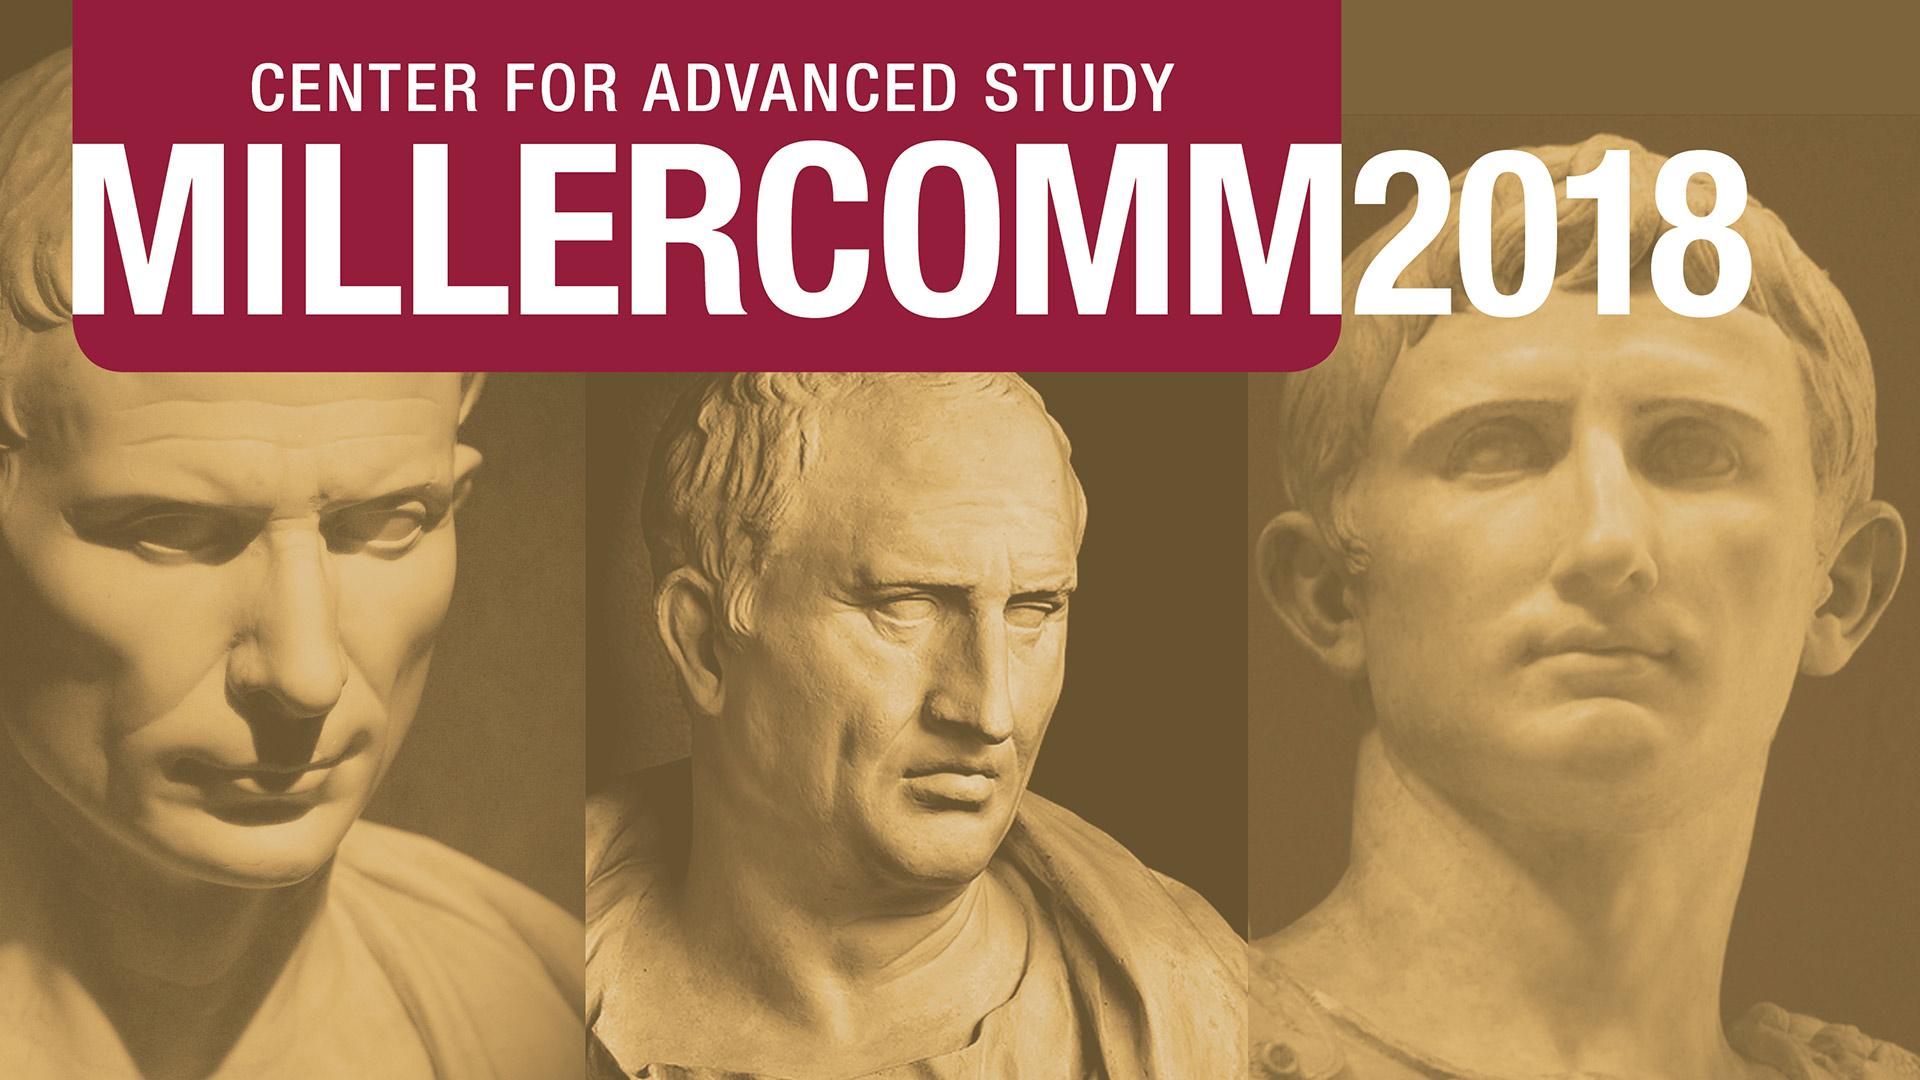 Center for Advanced Study Millercomm 2018. Headshots of three statues of men.